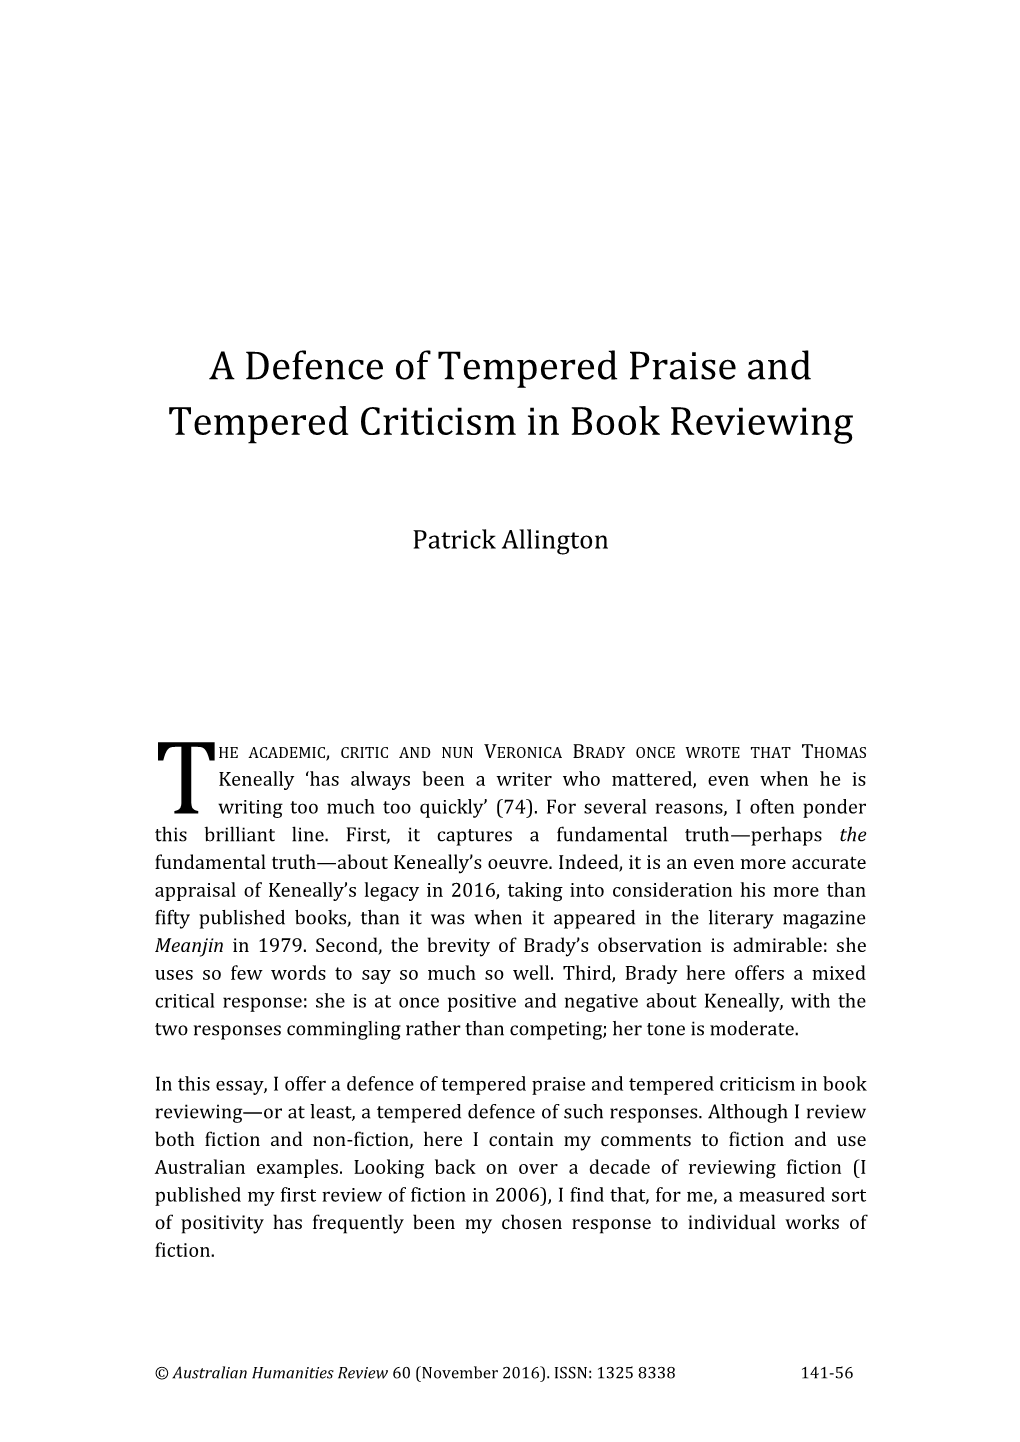 A Defence of Tempered Praise and Tempered Criticism in Book Reviewing